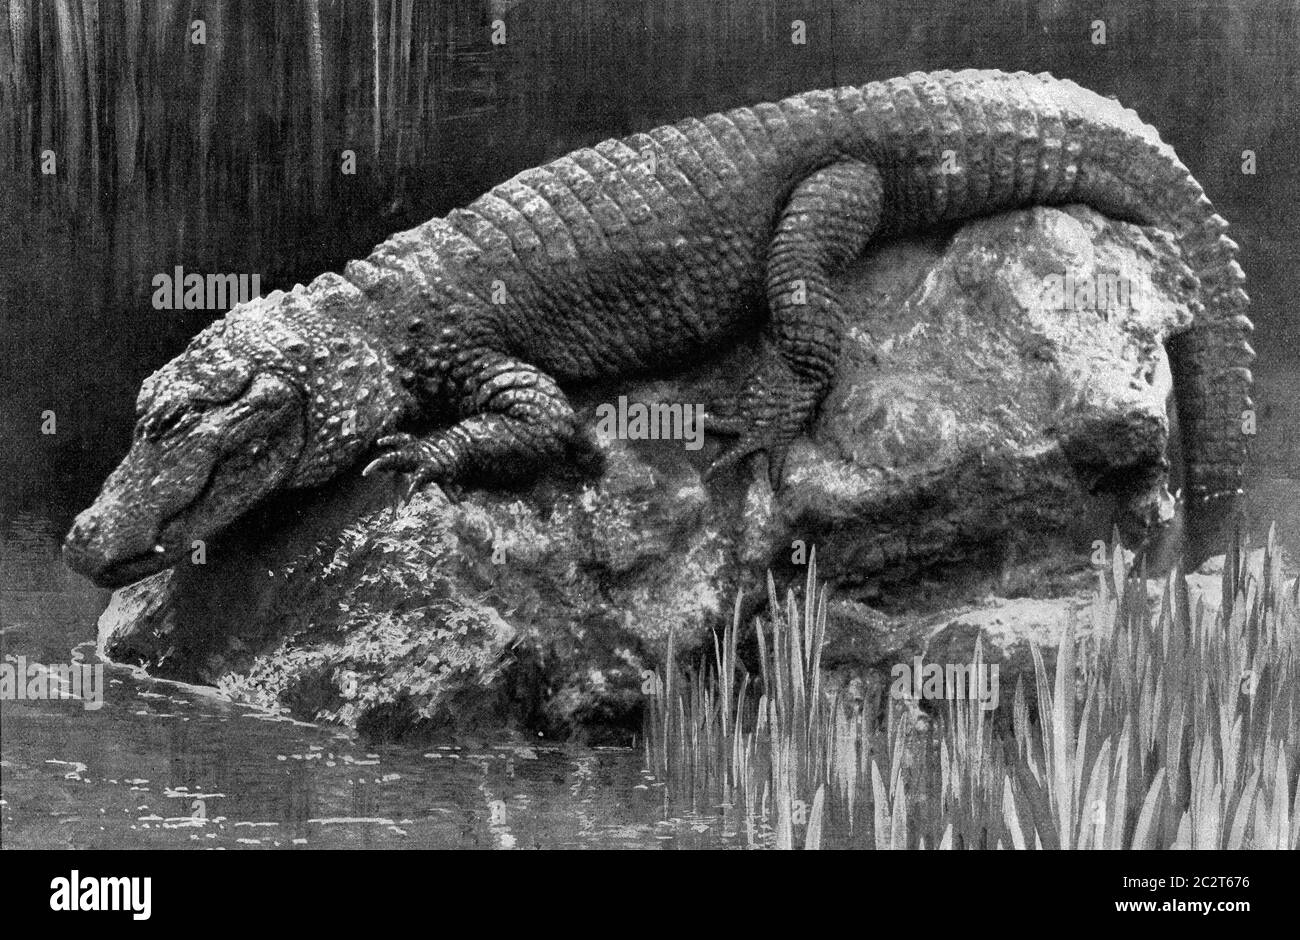 Chinese alligator, vintage engraved illustration. From the Universe and Humanity, 1910. Stock Photo